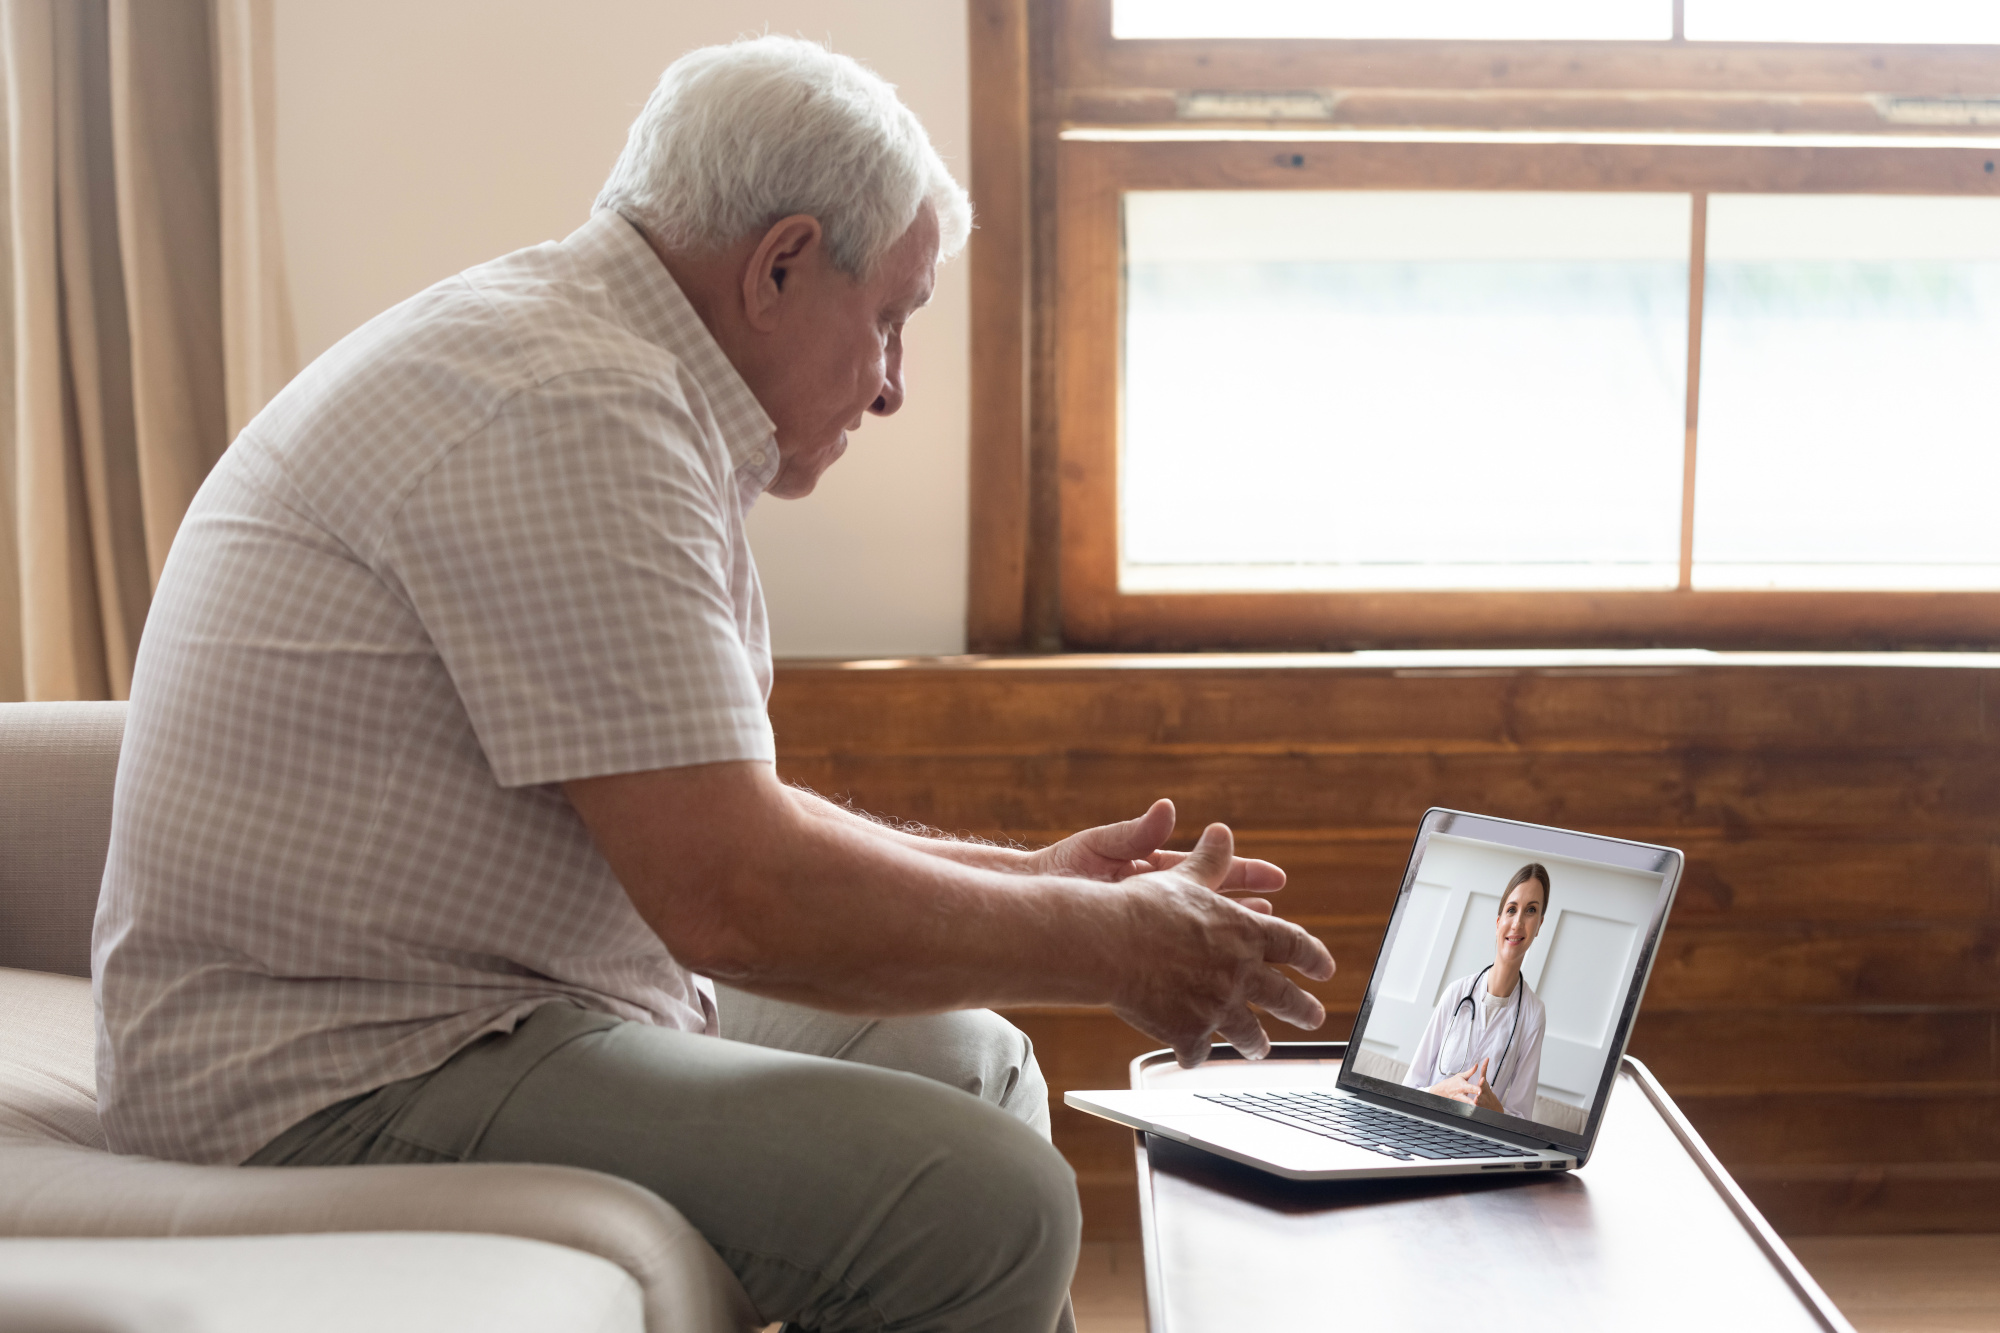 Telehealth appointments